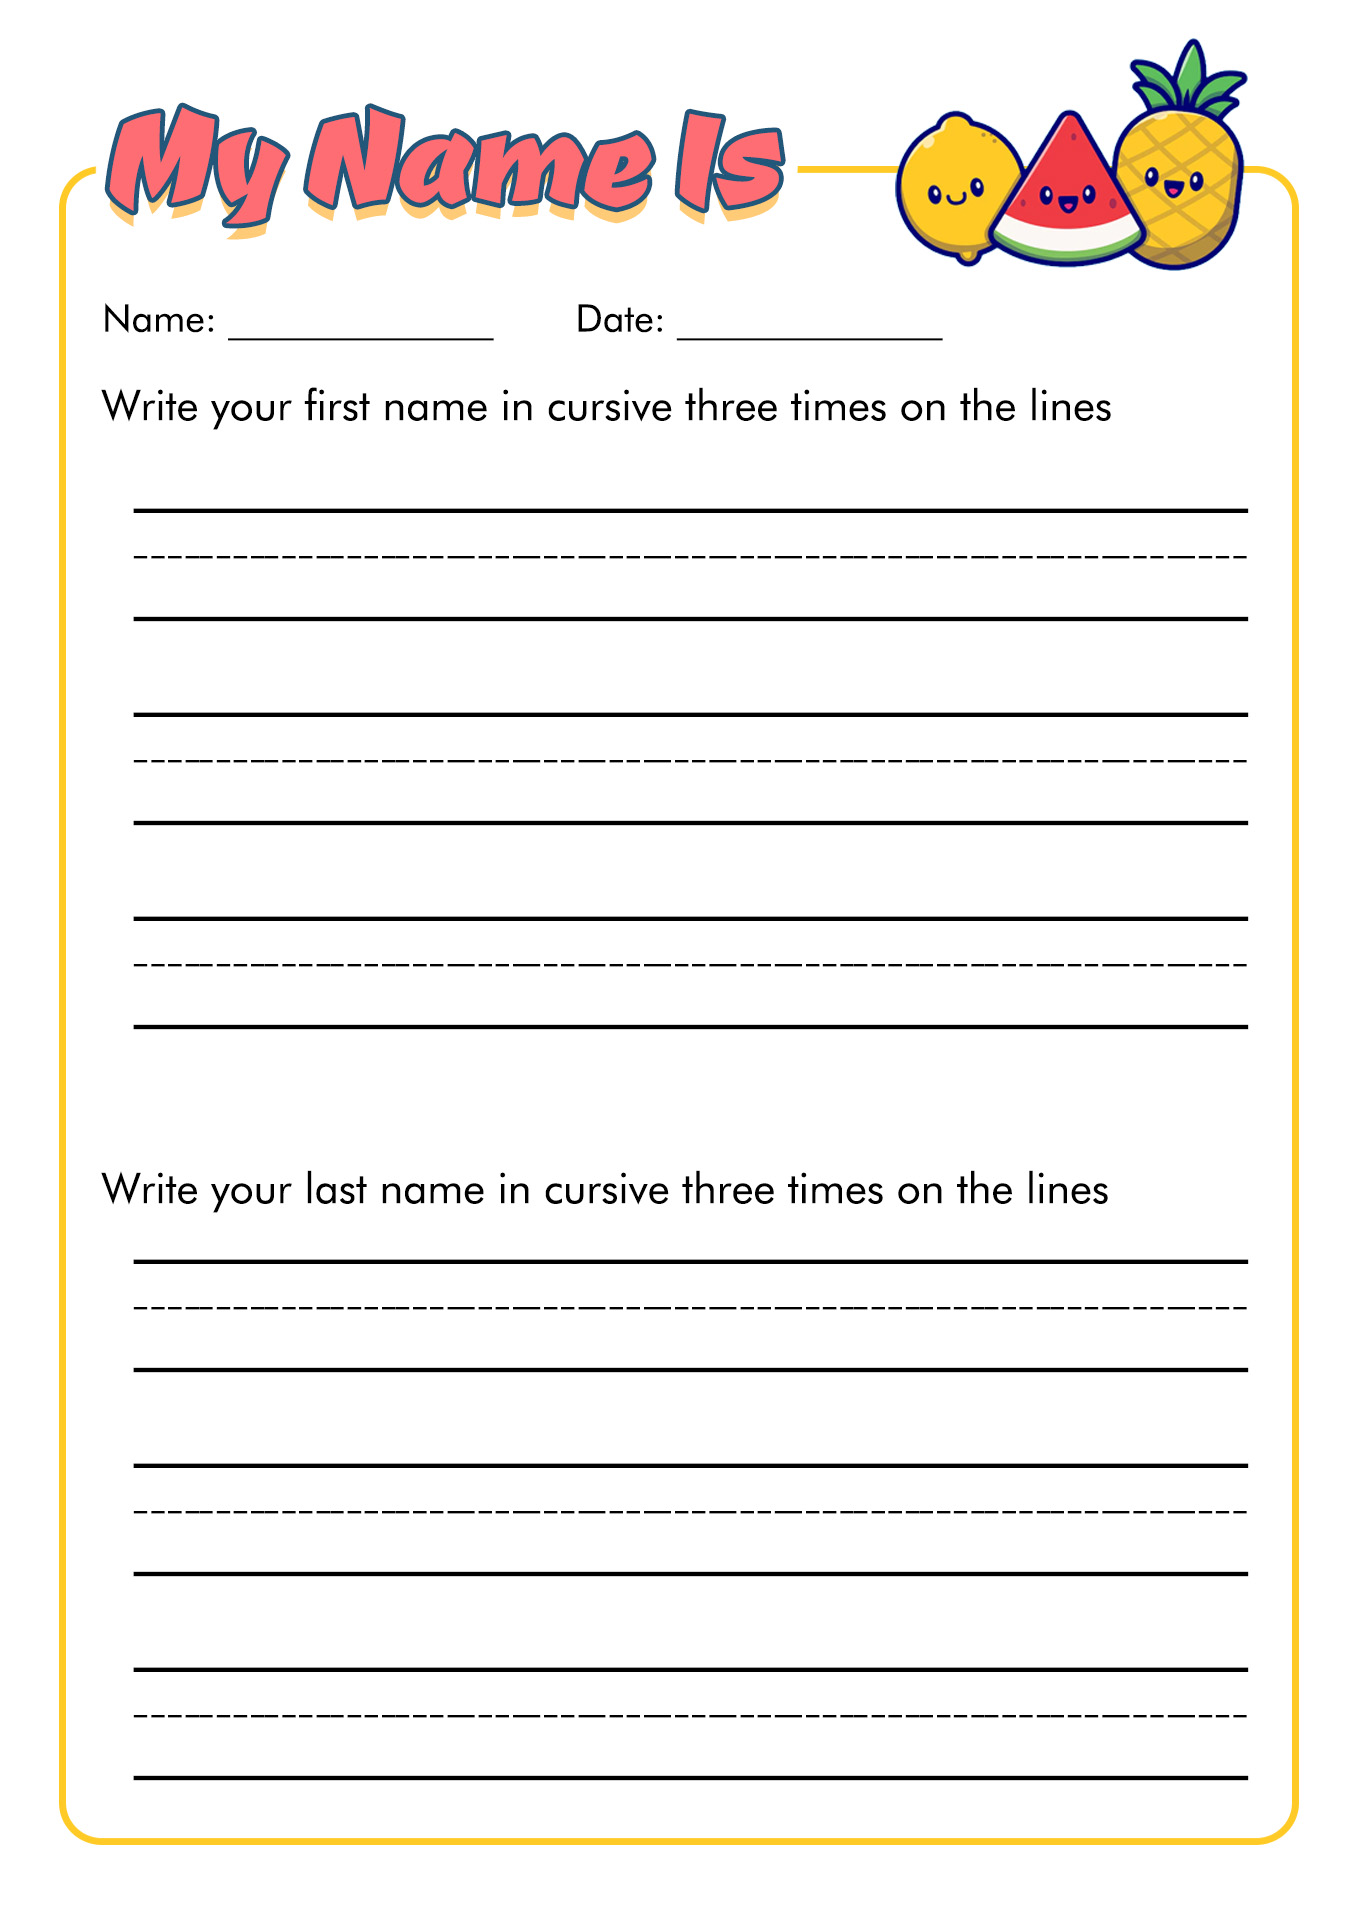 Writing Your Name Worksheets Image